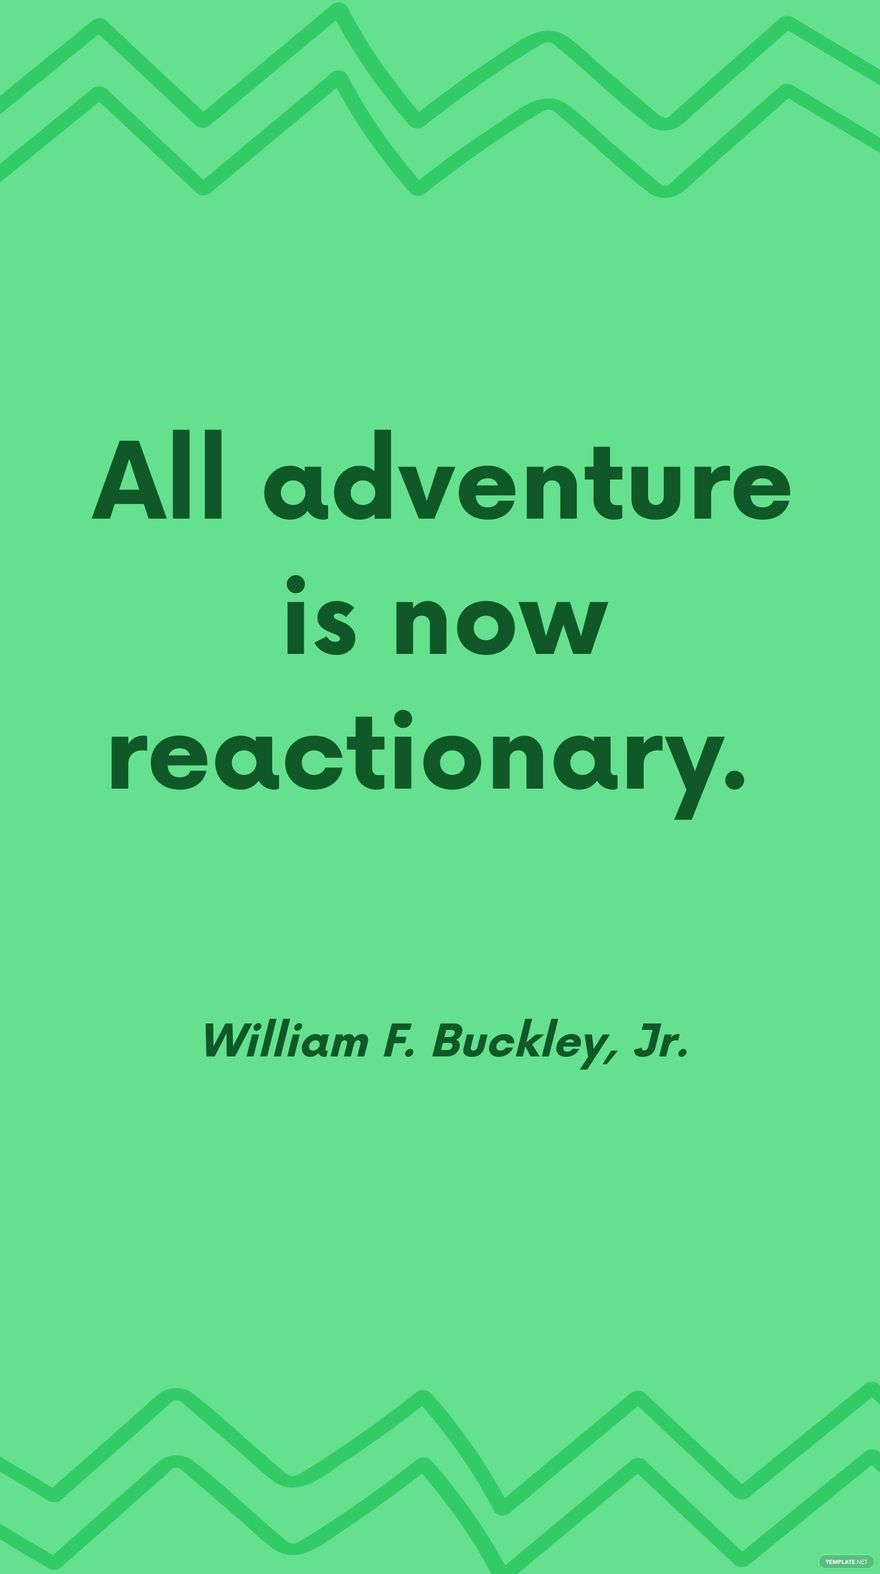 Free William F. Buckley, Jr. - All adventure is now reactionary.